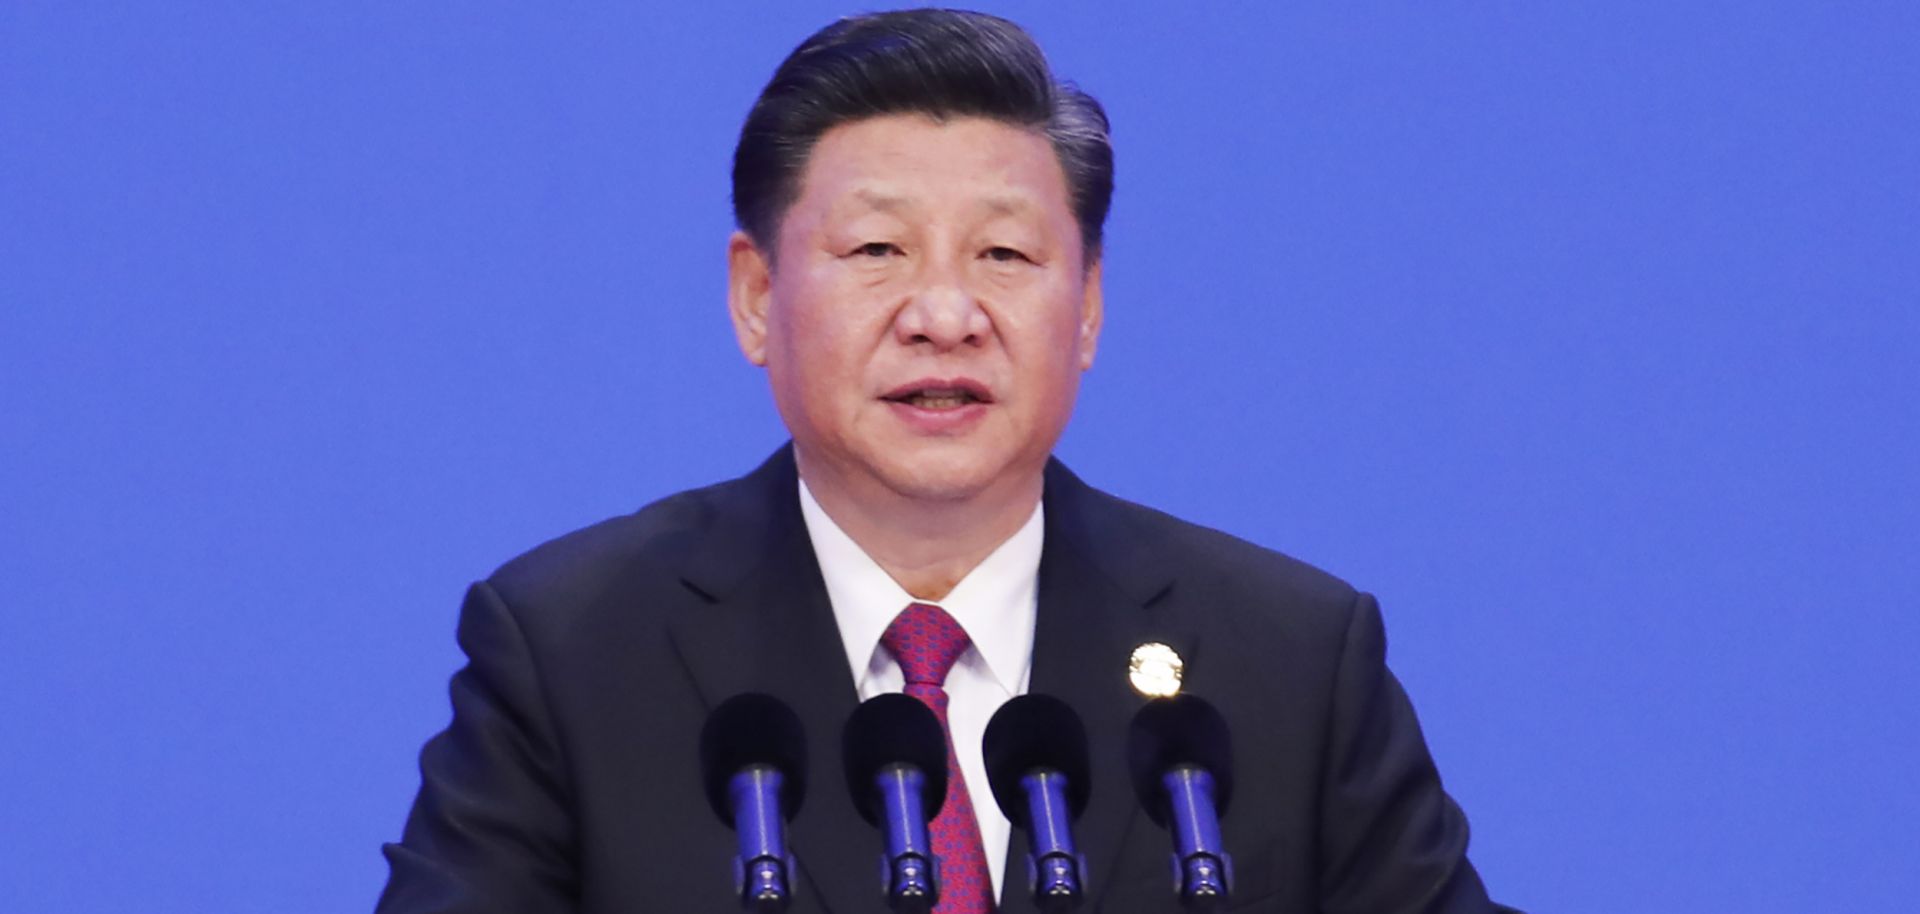 Chinese President Xi Jinping speaks at the Boao Forum for Asia on April 10, 2018.